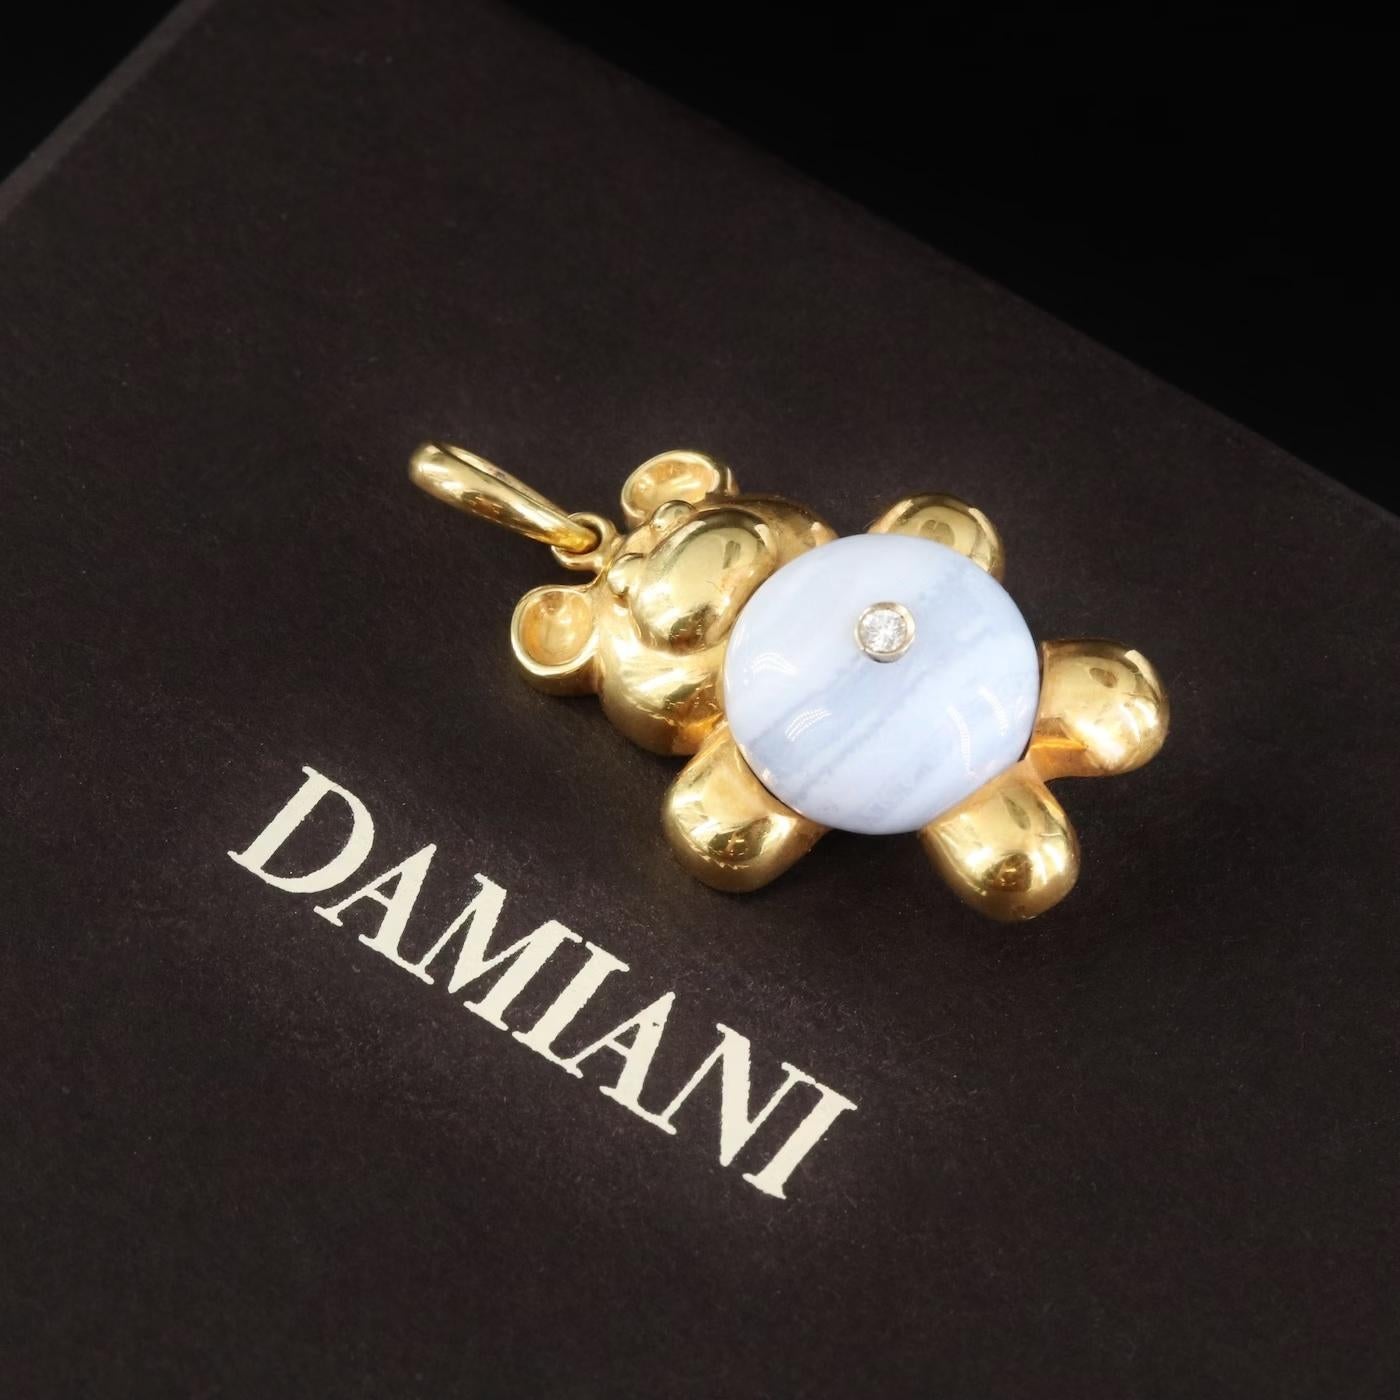 Designer DAMIANI - ITALY (stamped with the designer Hallmark 750 ☆3181 AL Damiani

This is a rare limited Italian masterpiece  

3D Bear shape, an amazing eye-catching piece 

NEW with Tags, Tag price $4500

18K Yellow gold, stamped 18K

A necklace